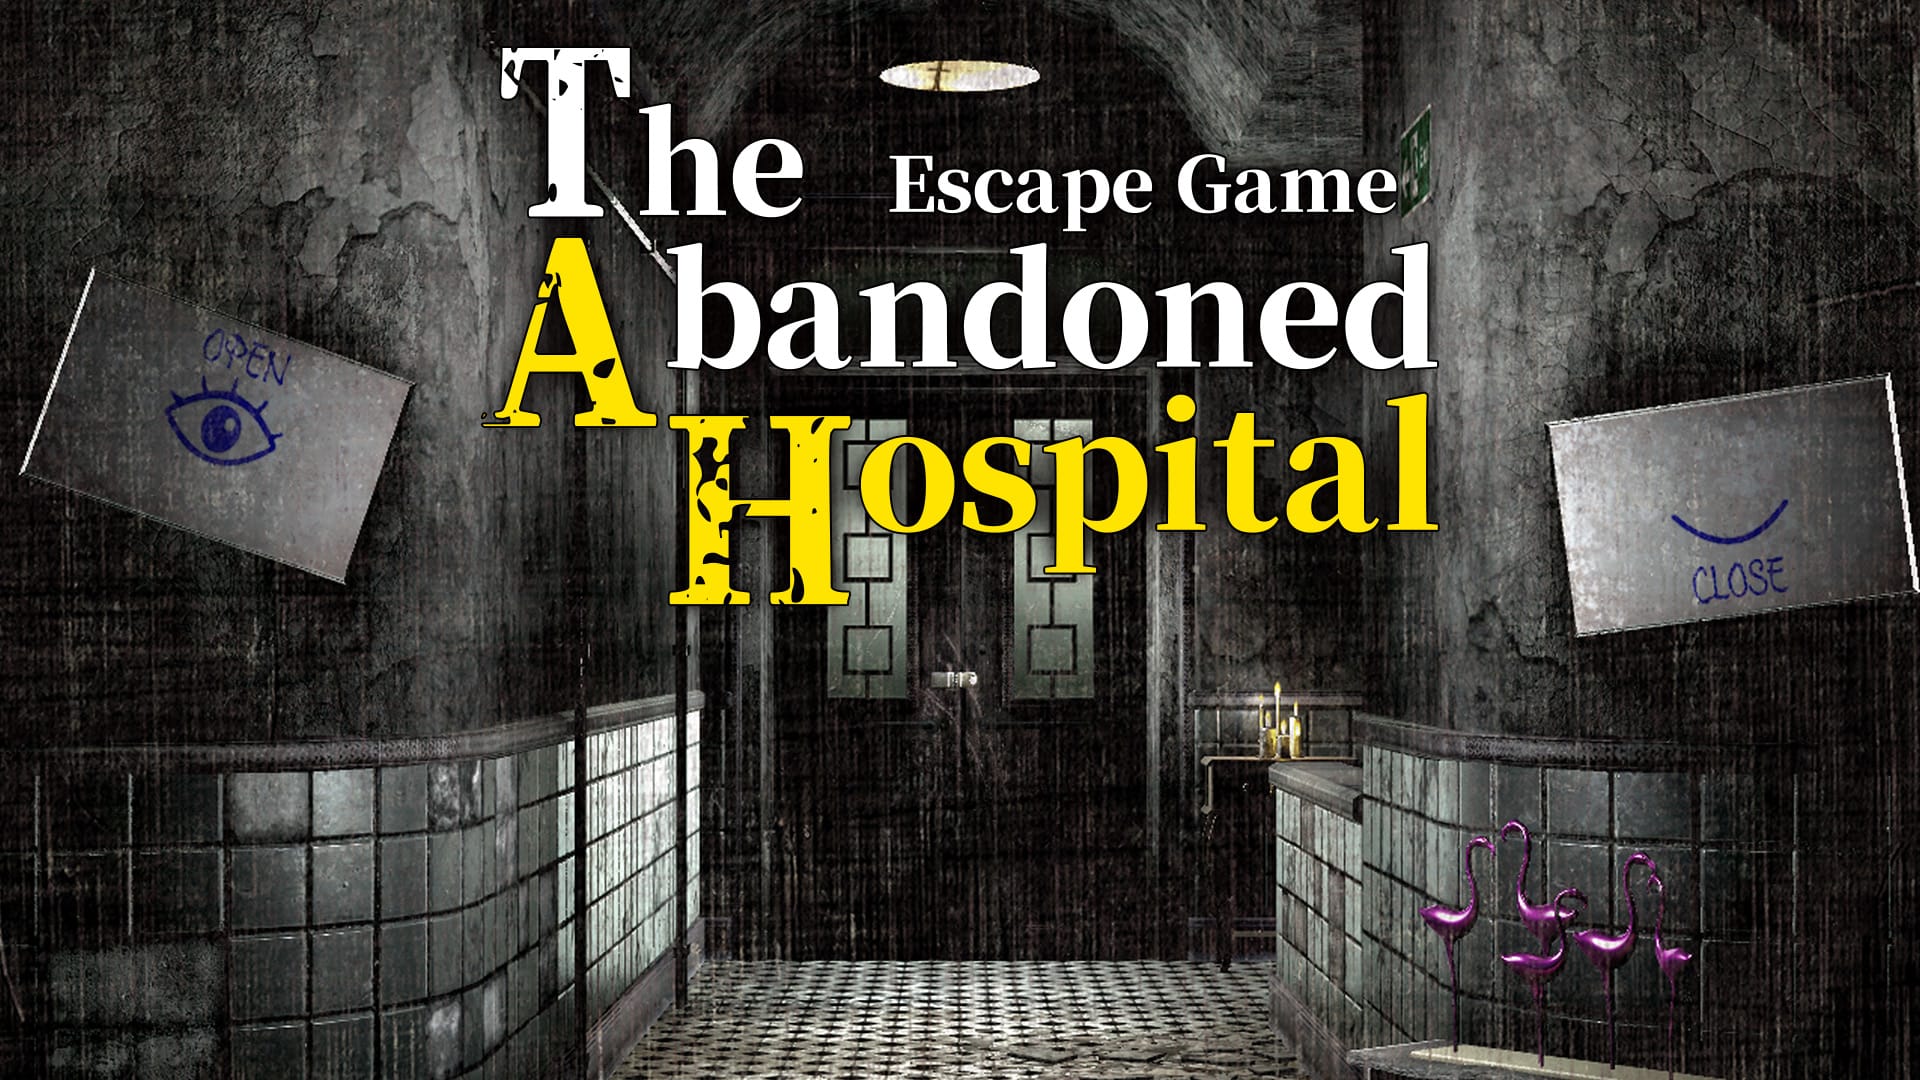 Escape Game The Abandoned Hospital